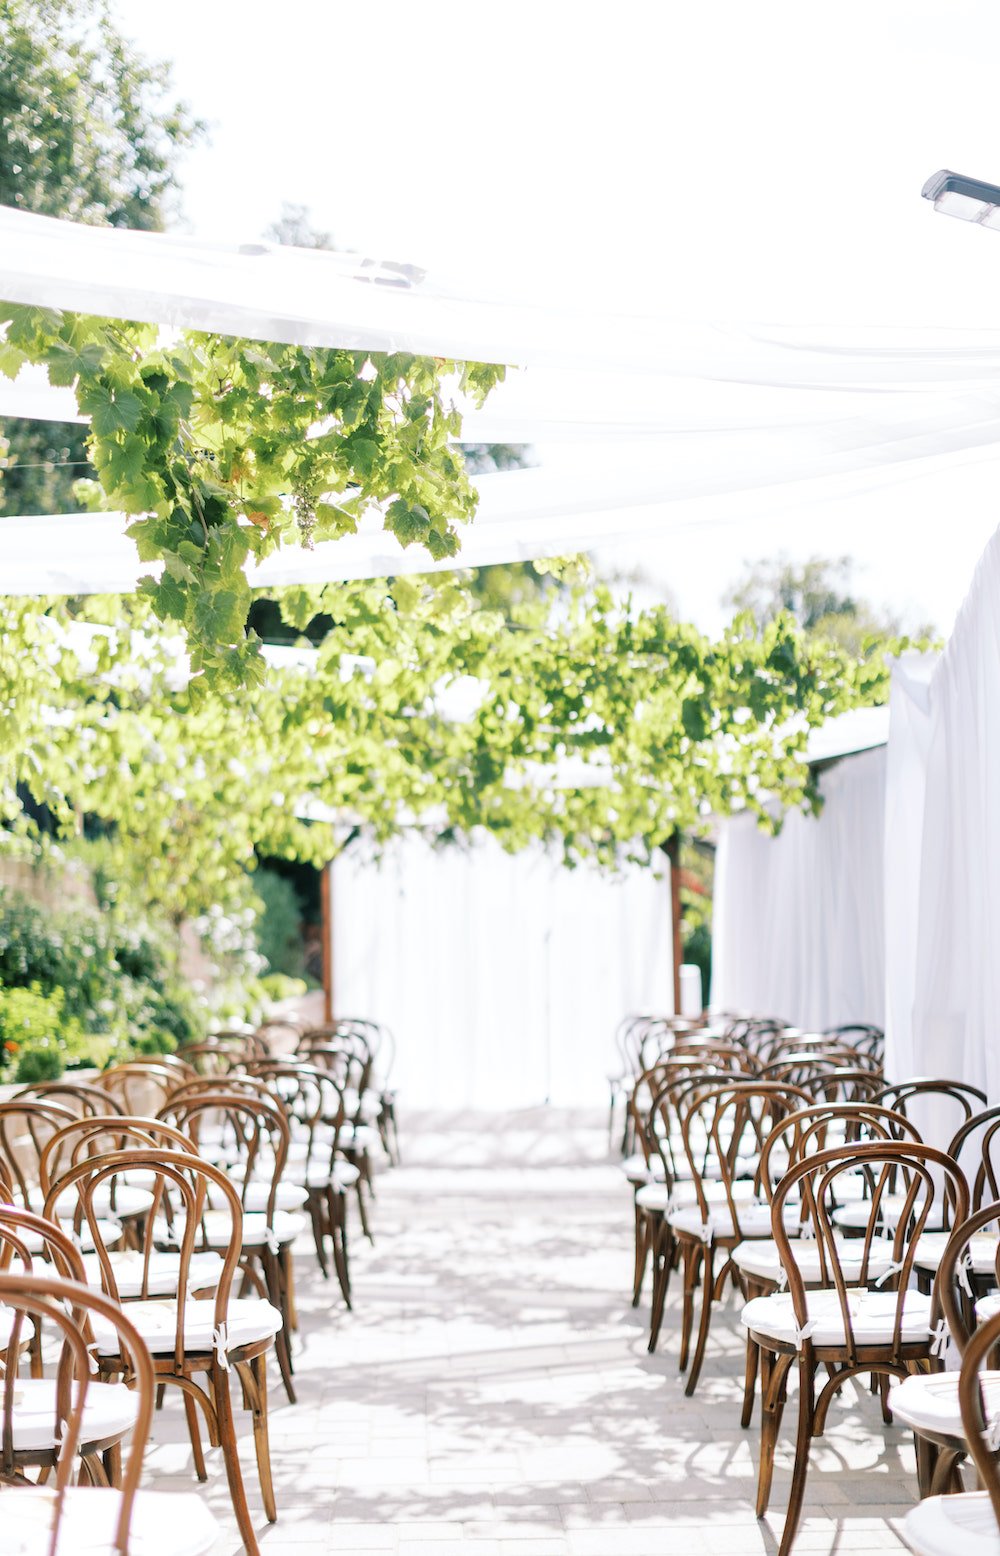 Outdoor wedding ceremony with draping and floral decor.